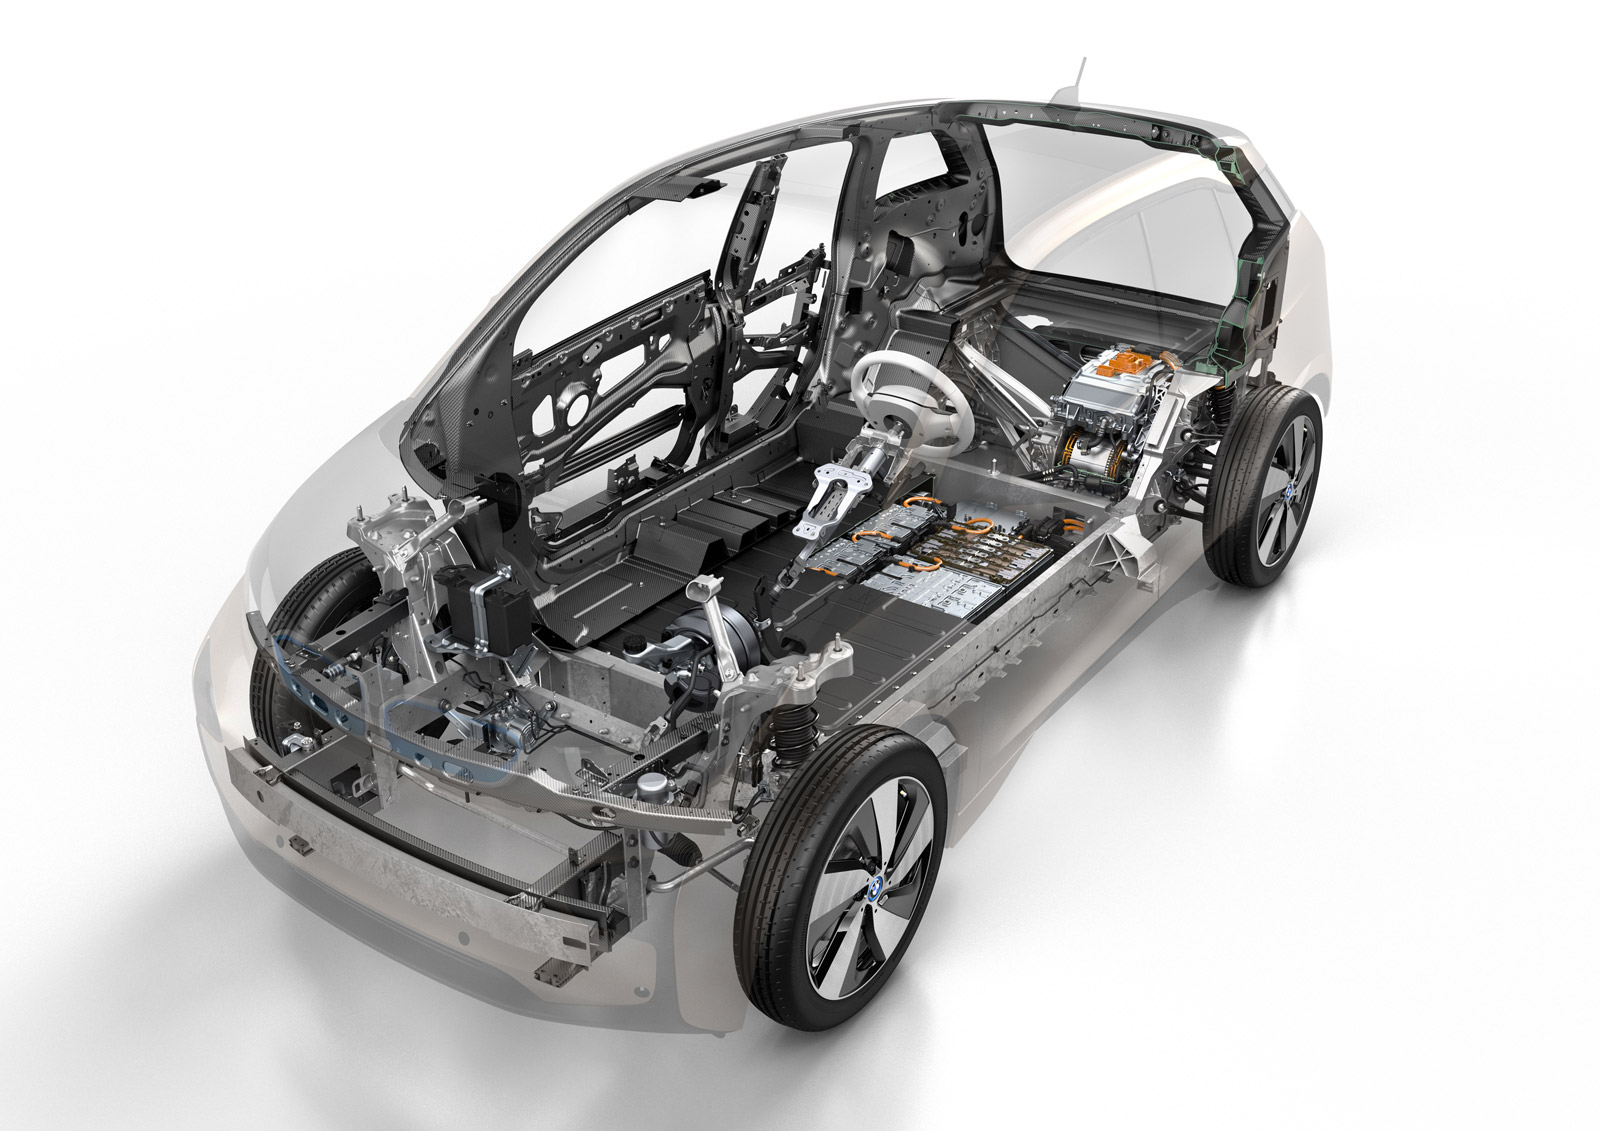 2014 BMW Electric Car: Specifications And Released